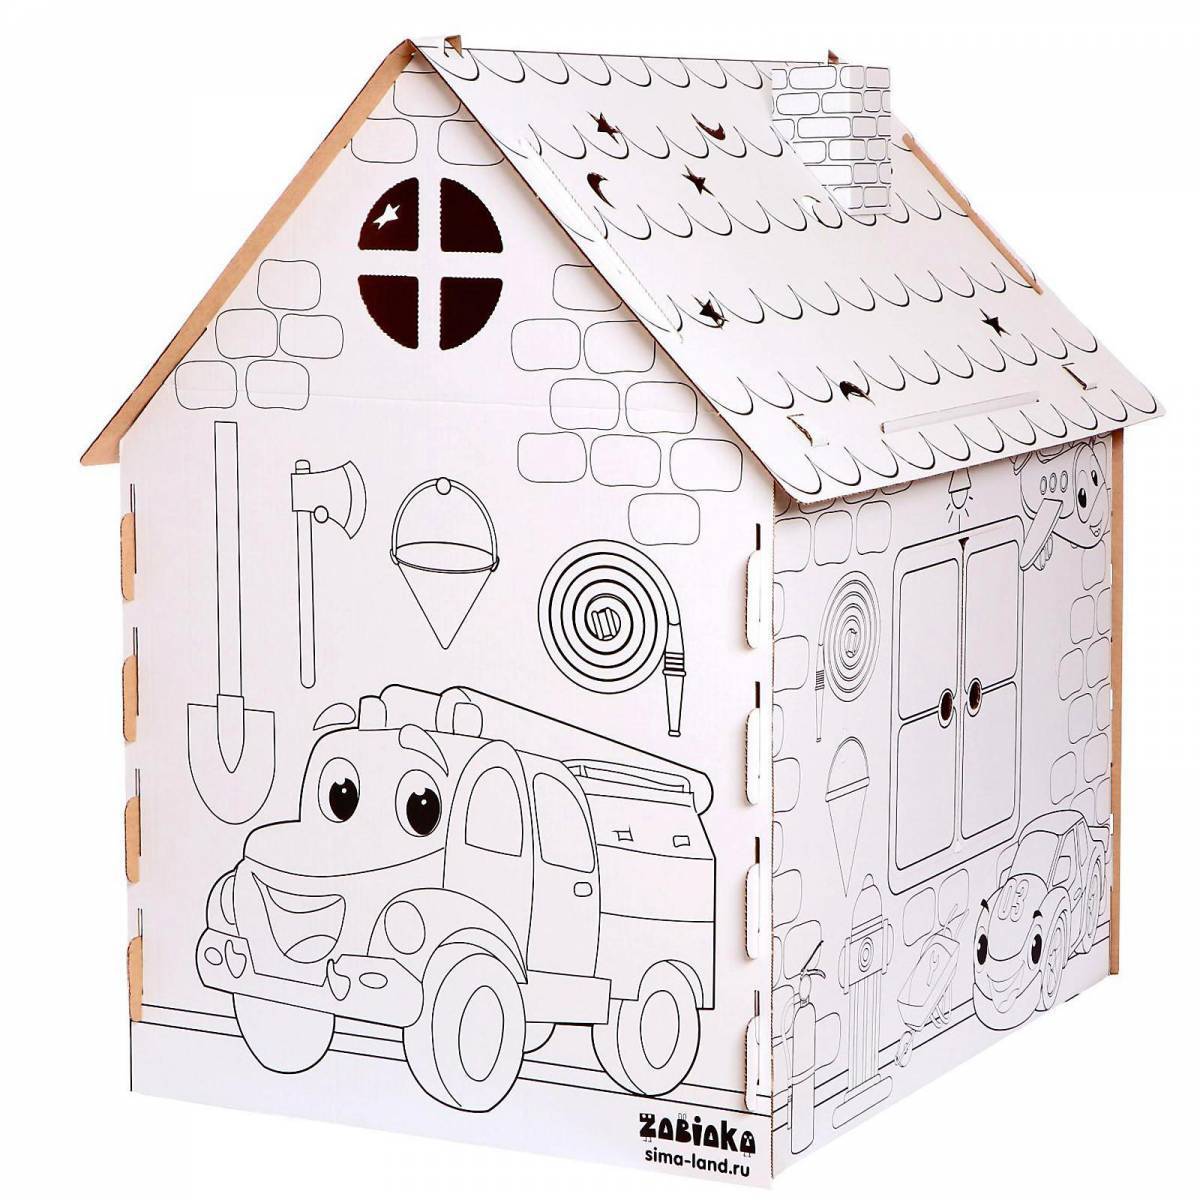 Coloring a cardboard house with rich colors